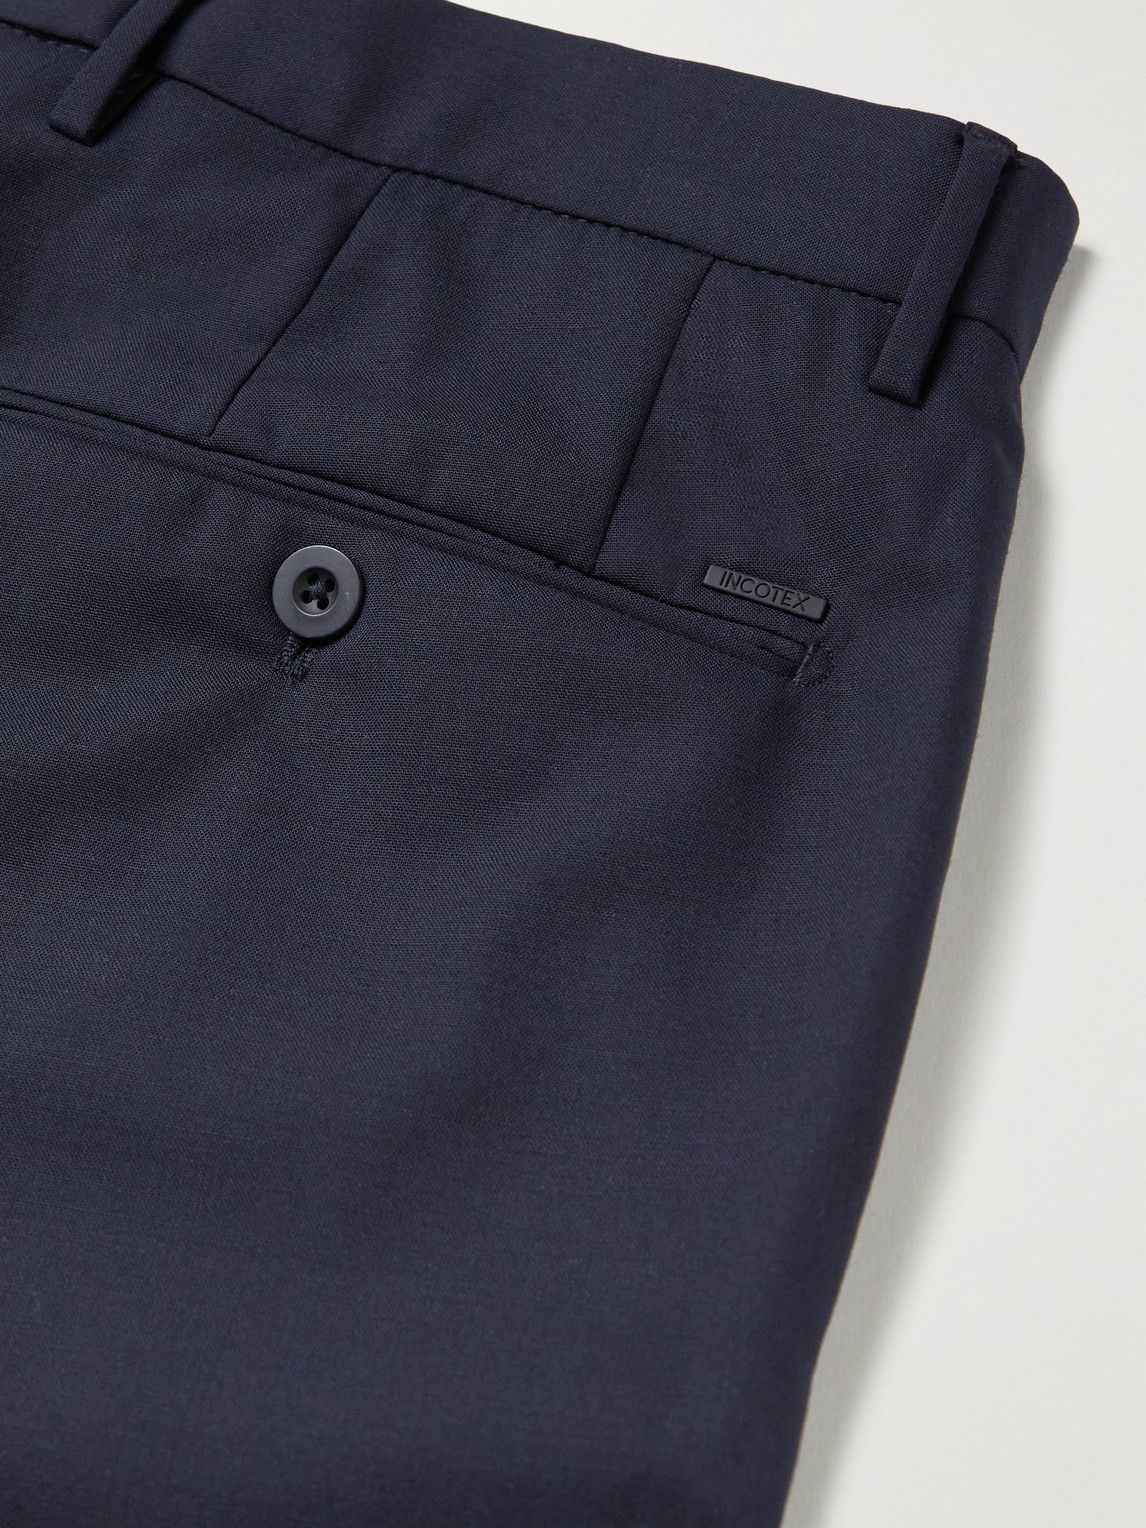 Tapered fit trousers in certified summer satin | Incotex | Slowear US